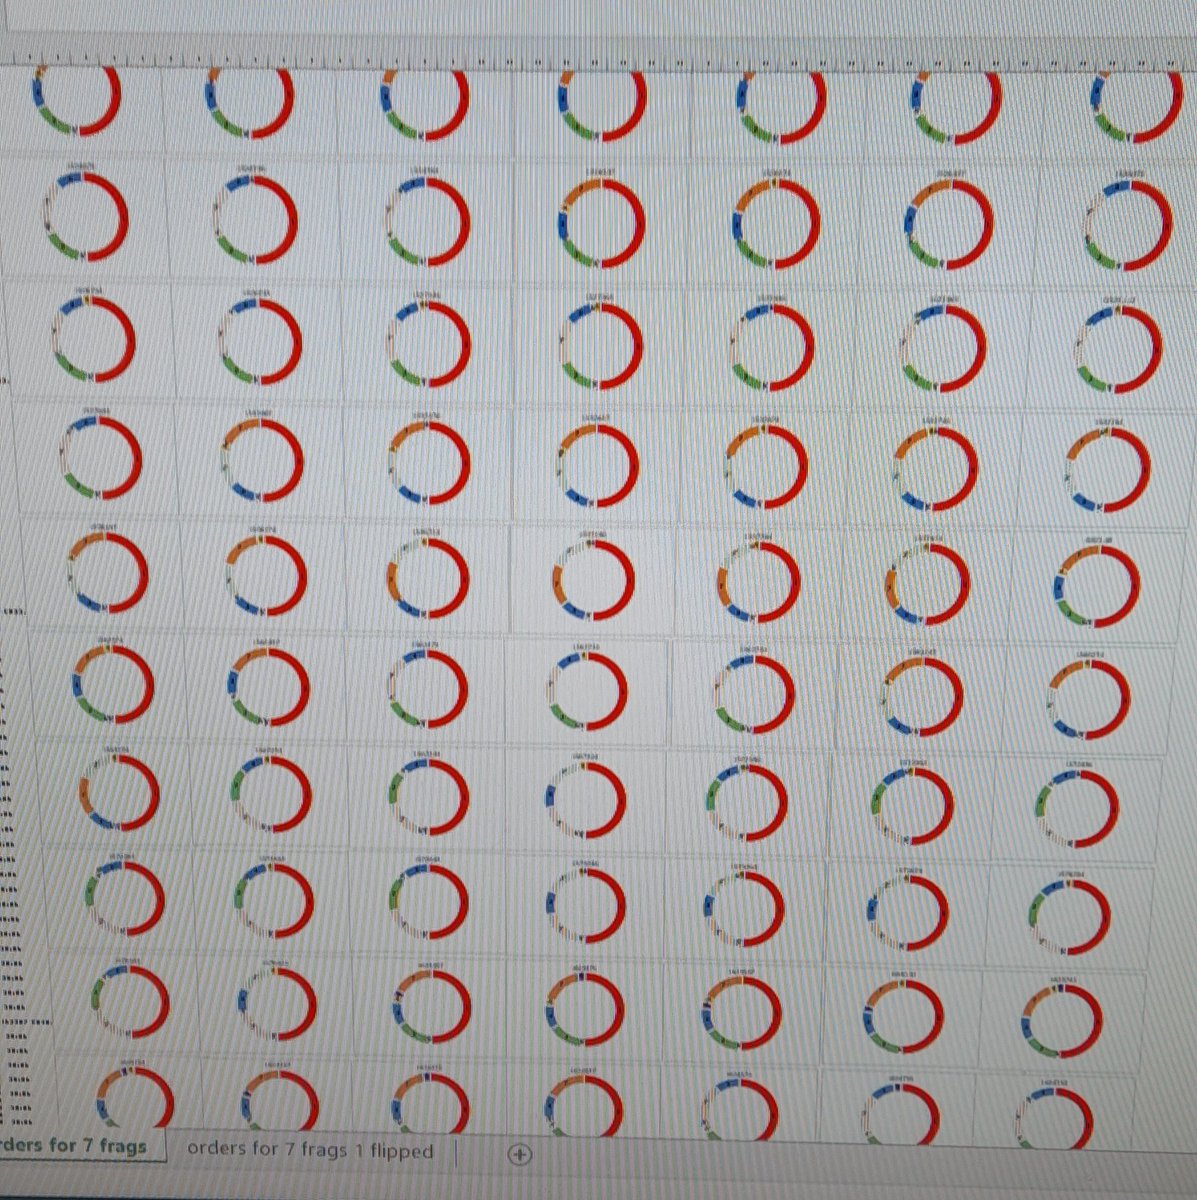 It's took me 3 days to create 720 #salmonella genome structures as doughnut pie charts 🍩🍩🍩🍩🍩🍩🍩 time to start the next 720 🍩🍩🍩🍩🍩🍩 #gottacatchthemall #genomerearrangement